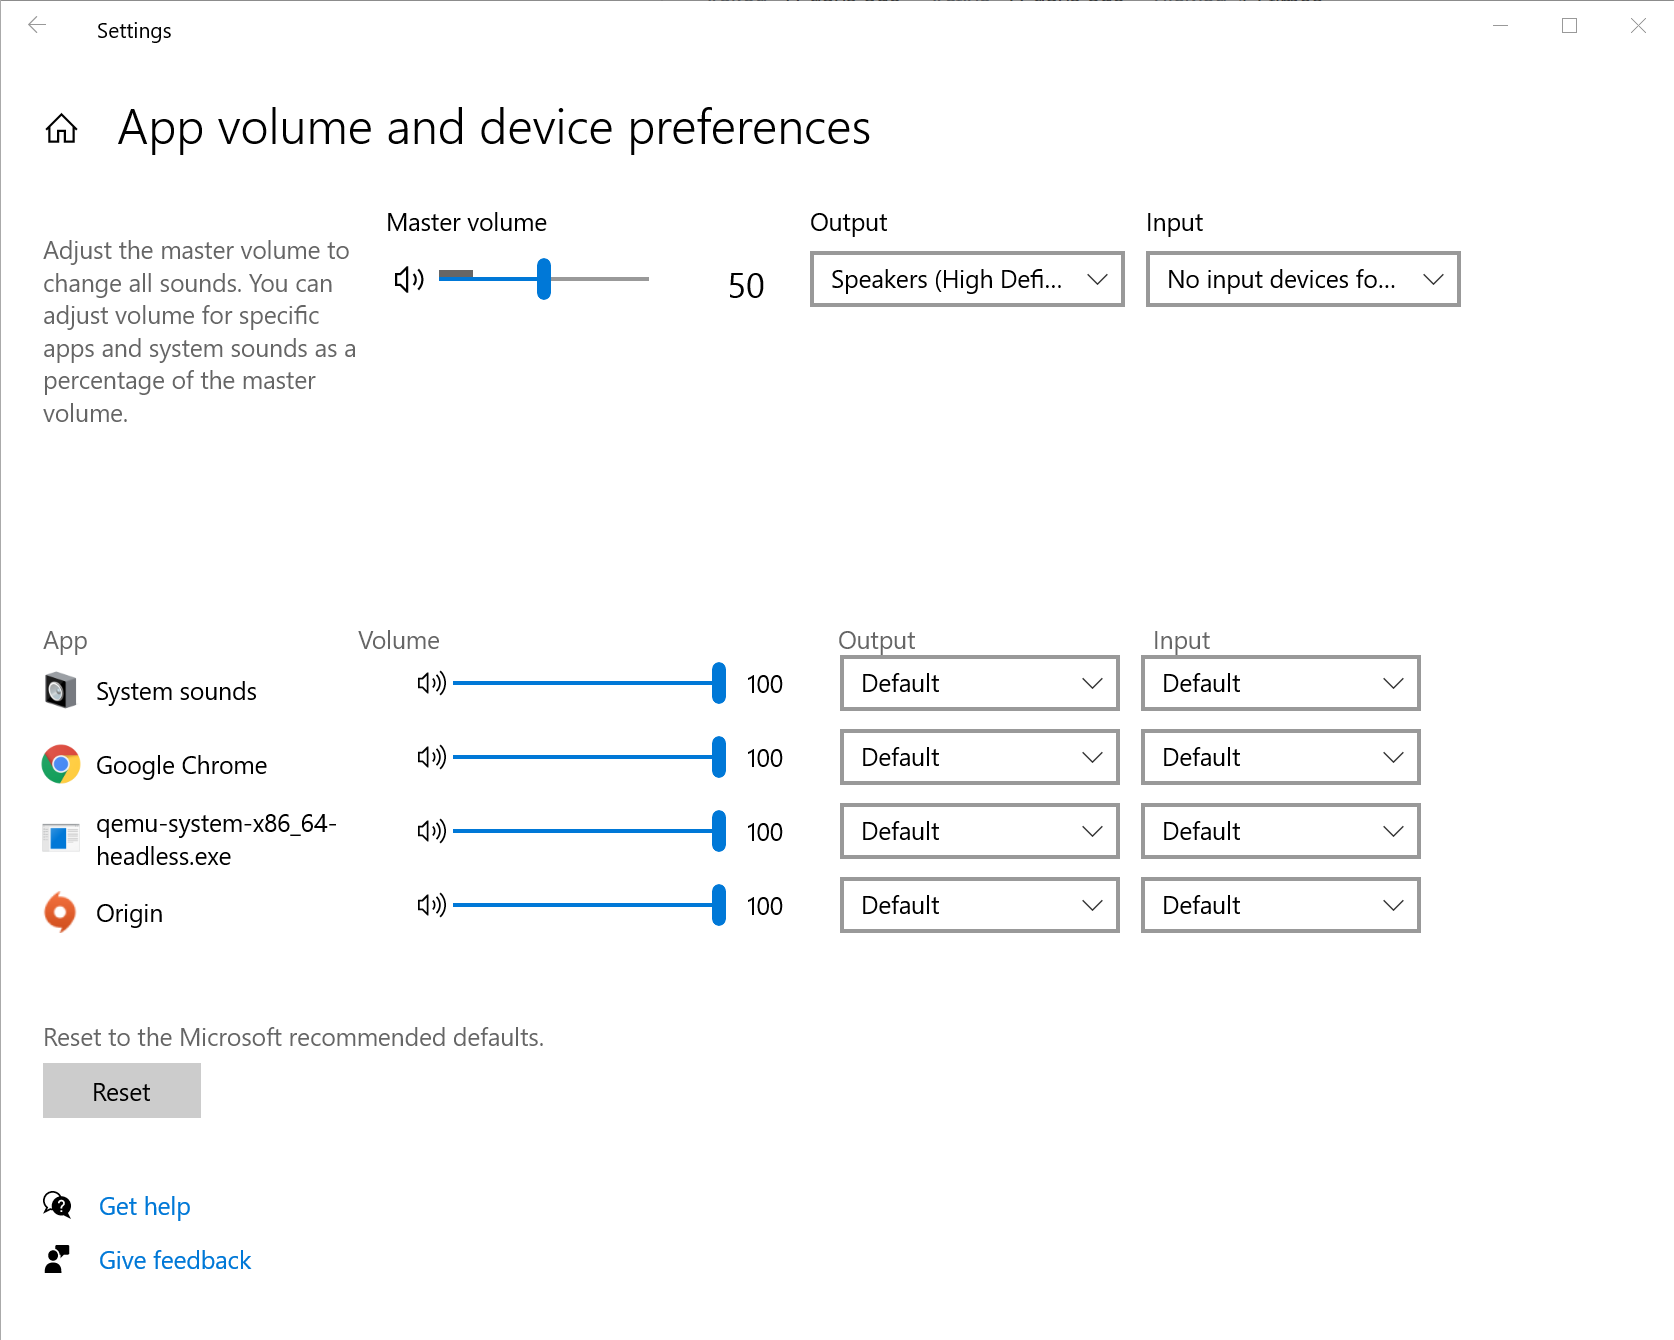 App volume and device preference